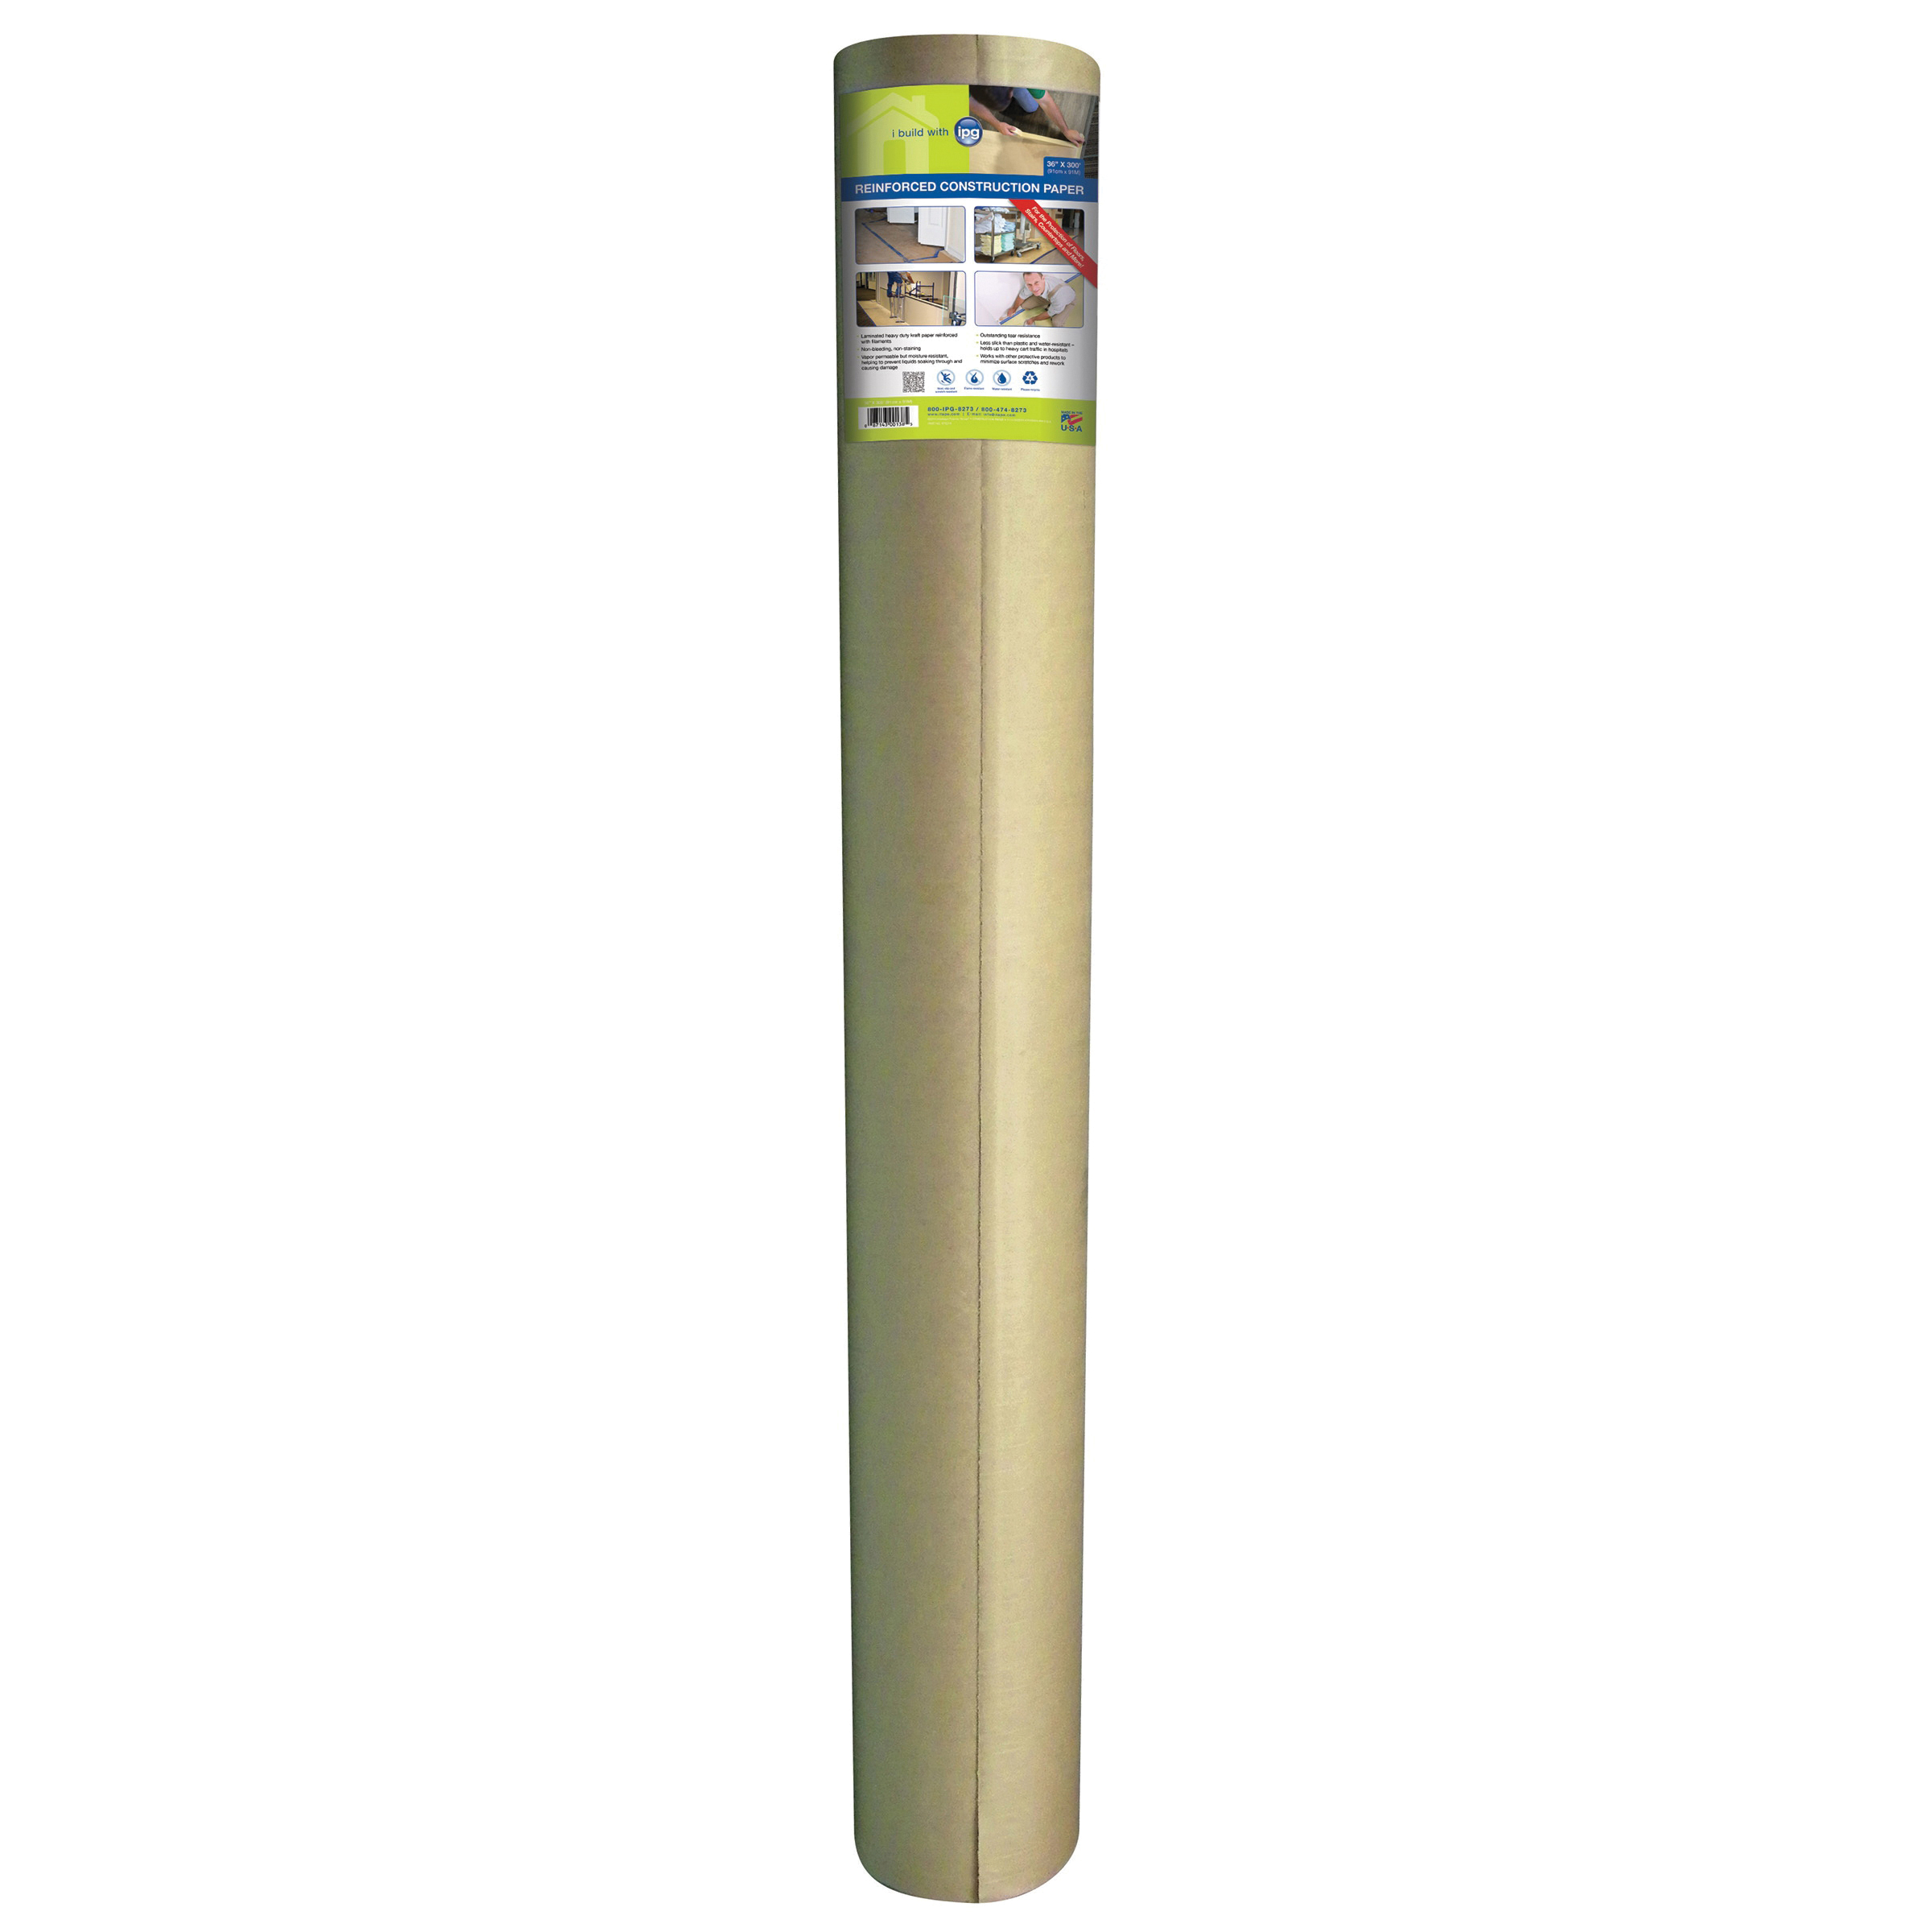 ipg® K73025 Legend Light Duty Reinforced Water Activated Tape, 114 m L x 70 mm W, 5.7 mil THK, High Melt Index Polypropylene Based Co-Polymer/Chemically Grafted Starch Based Copolymer Adhesive, Natural Kraft Paper Backing, Natural